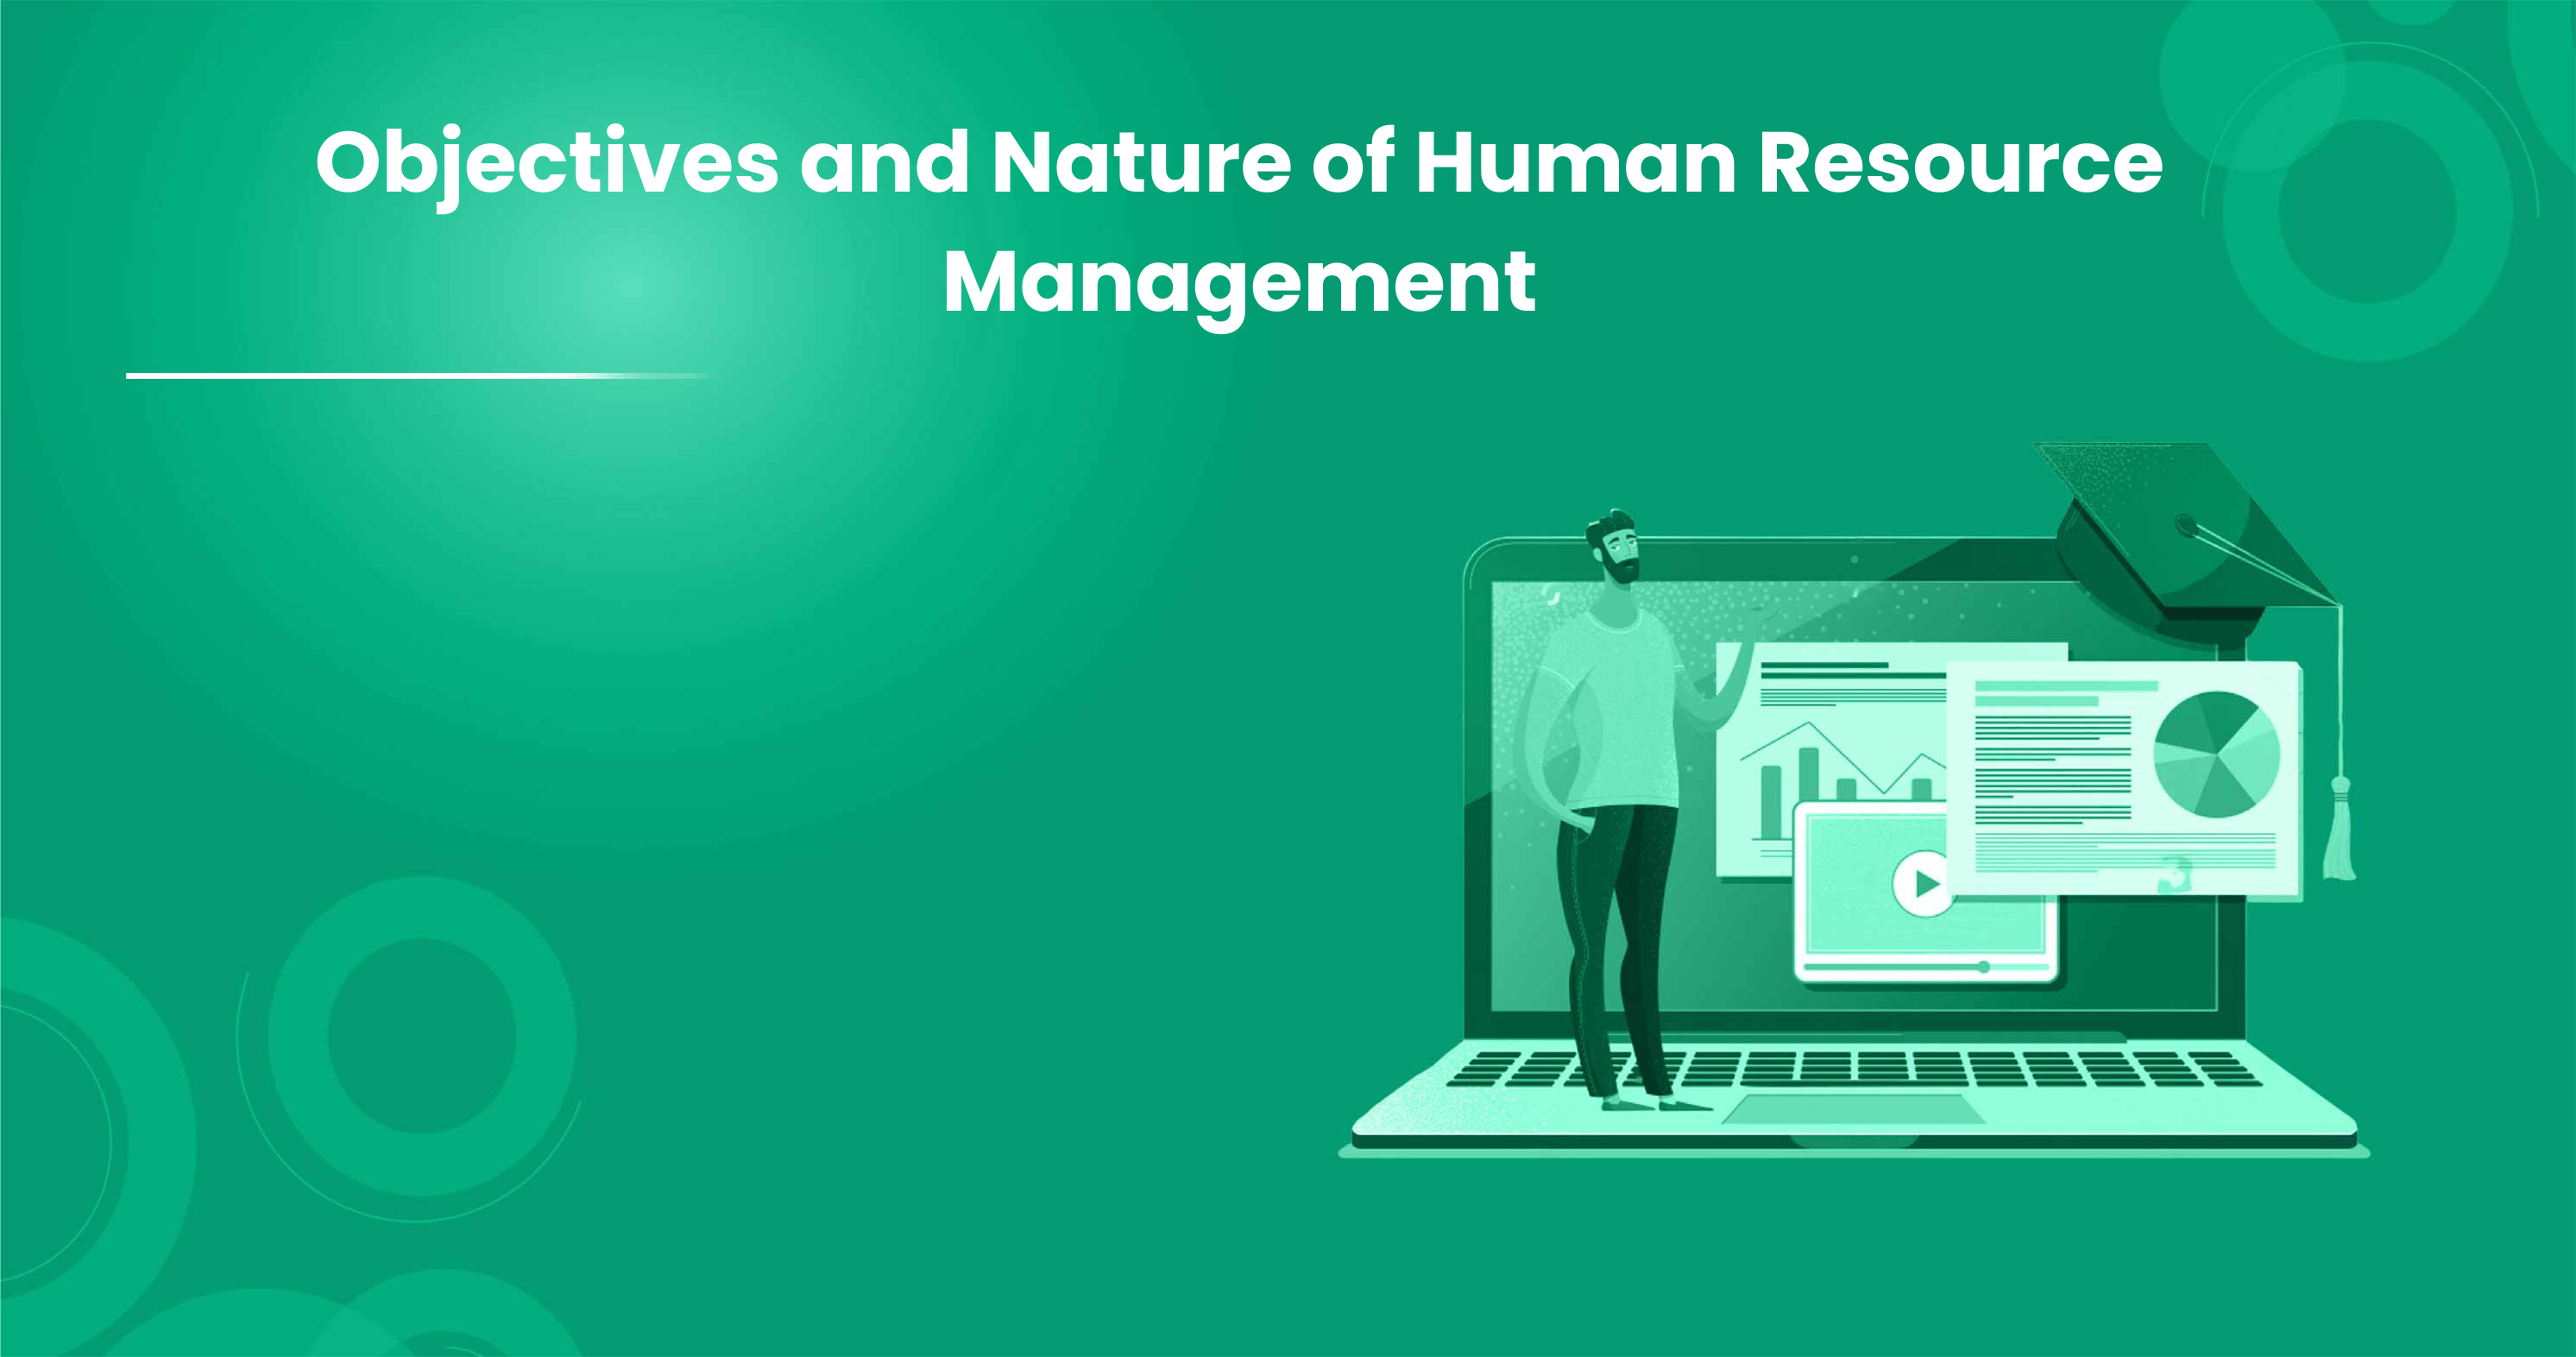 Objectives and Nature of Human Resource Management